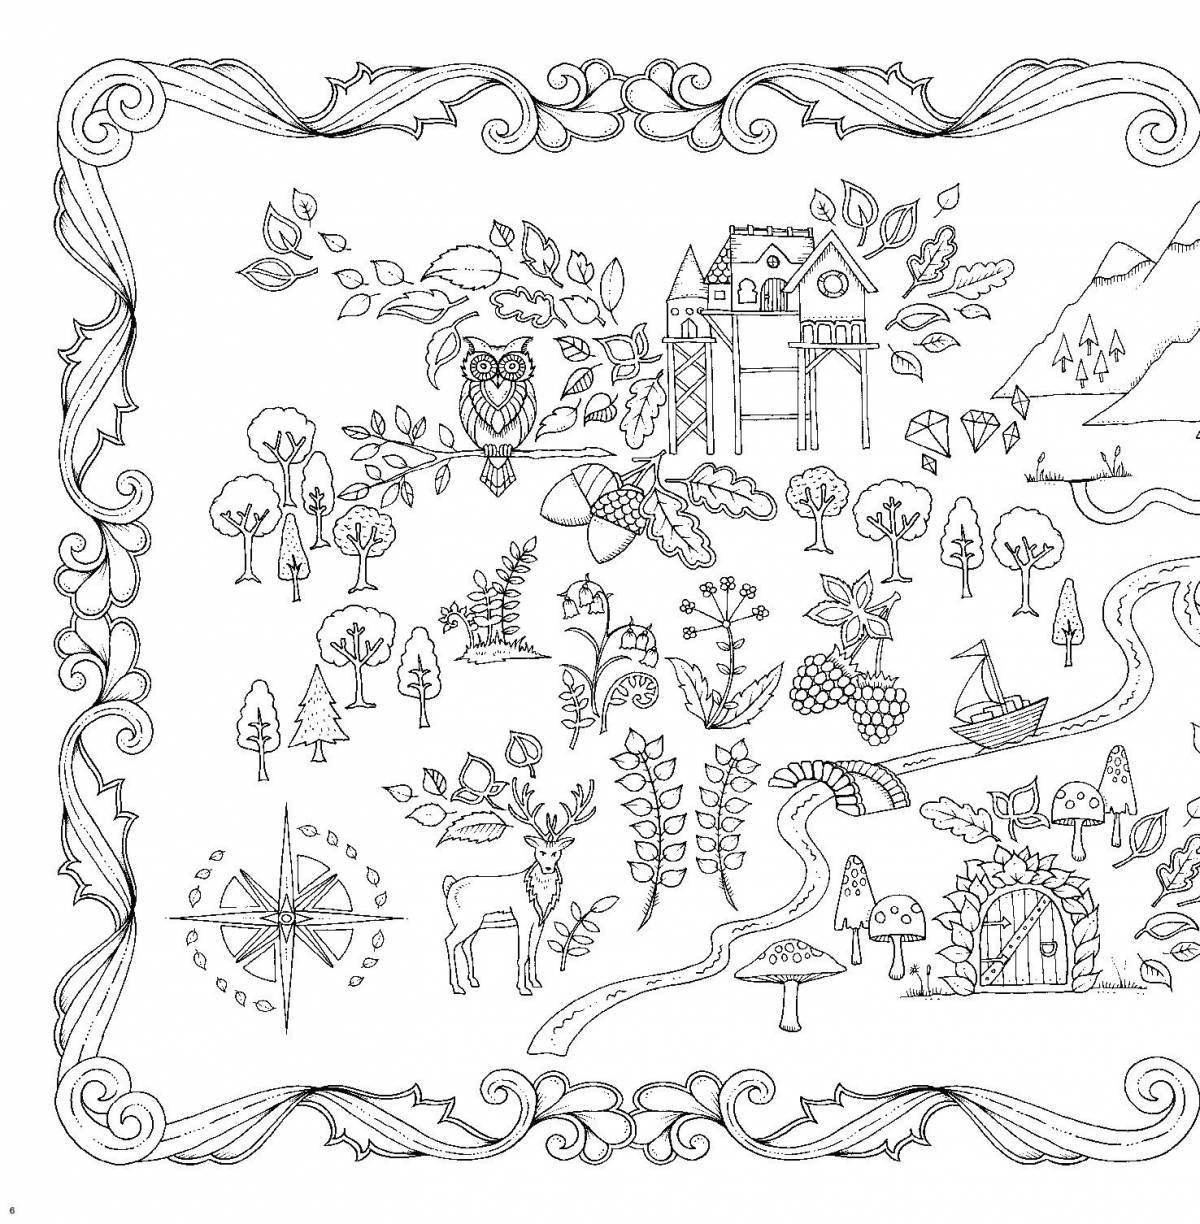 Blissful anti-stress forest coloring book